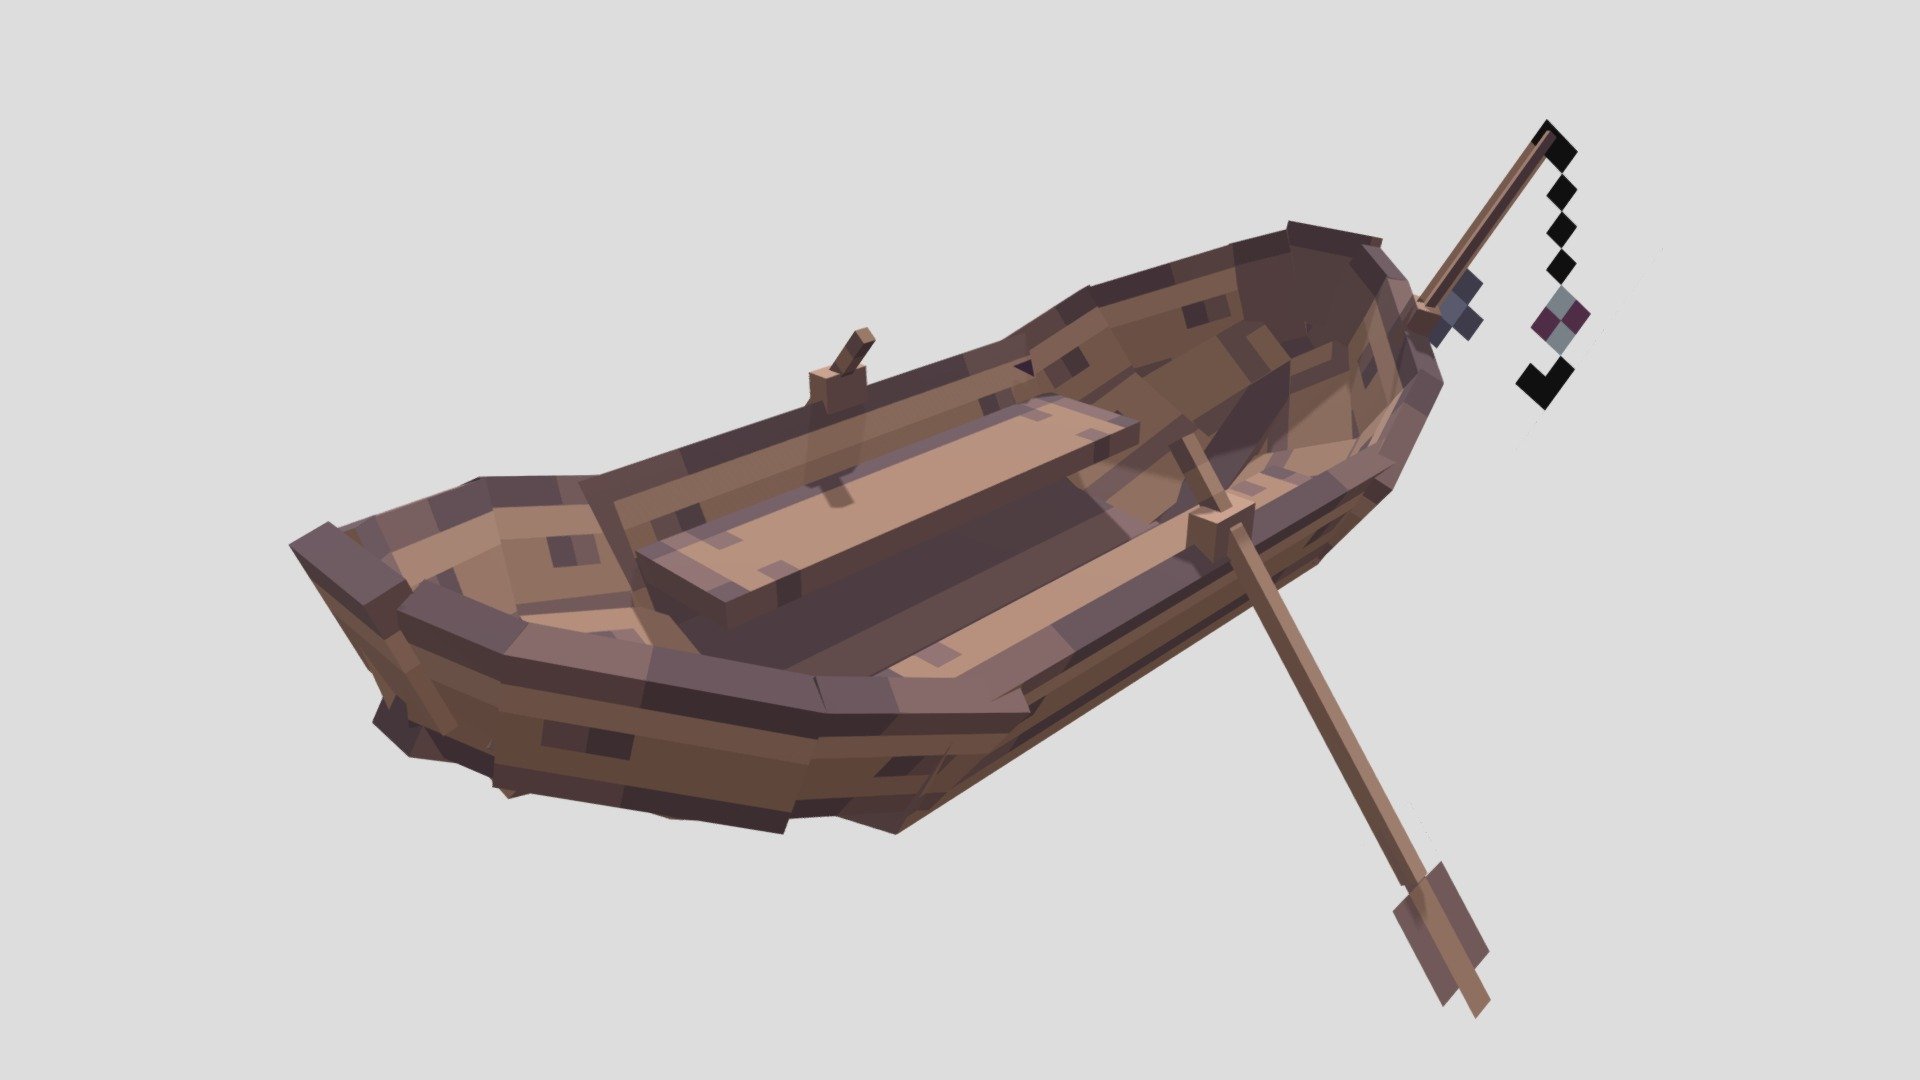 Fishing Boat (Low-poly), 43 Cubes, 128x 16bit Texture. Created in BlockBench.

Discord for Commissions: SickSnipes#0001 3d model